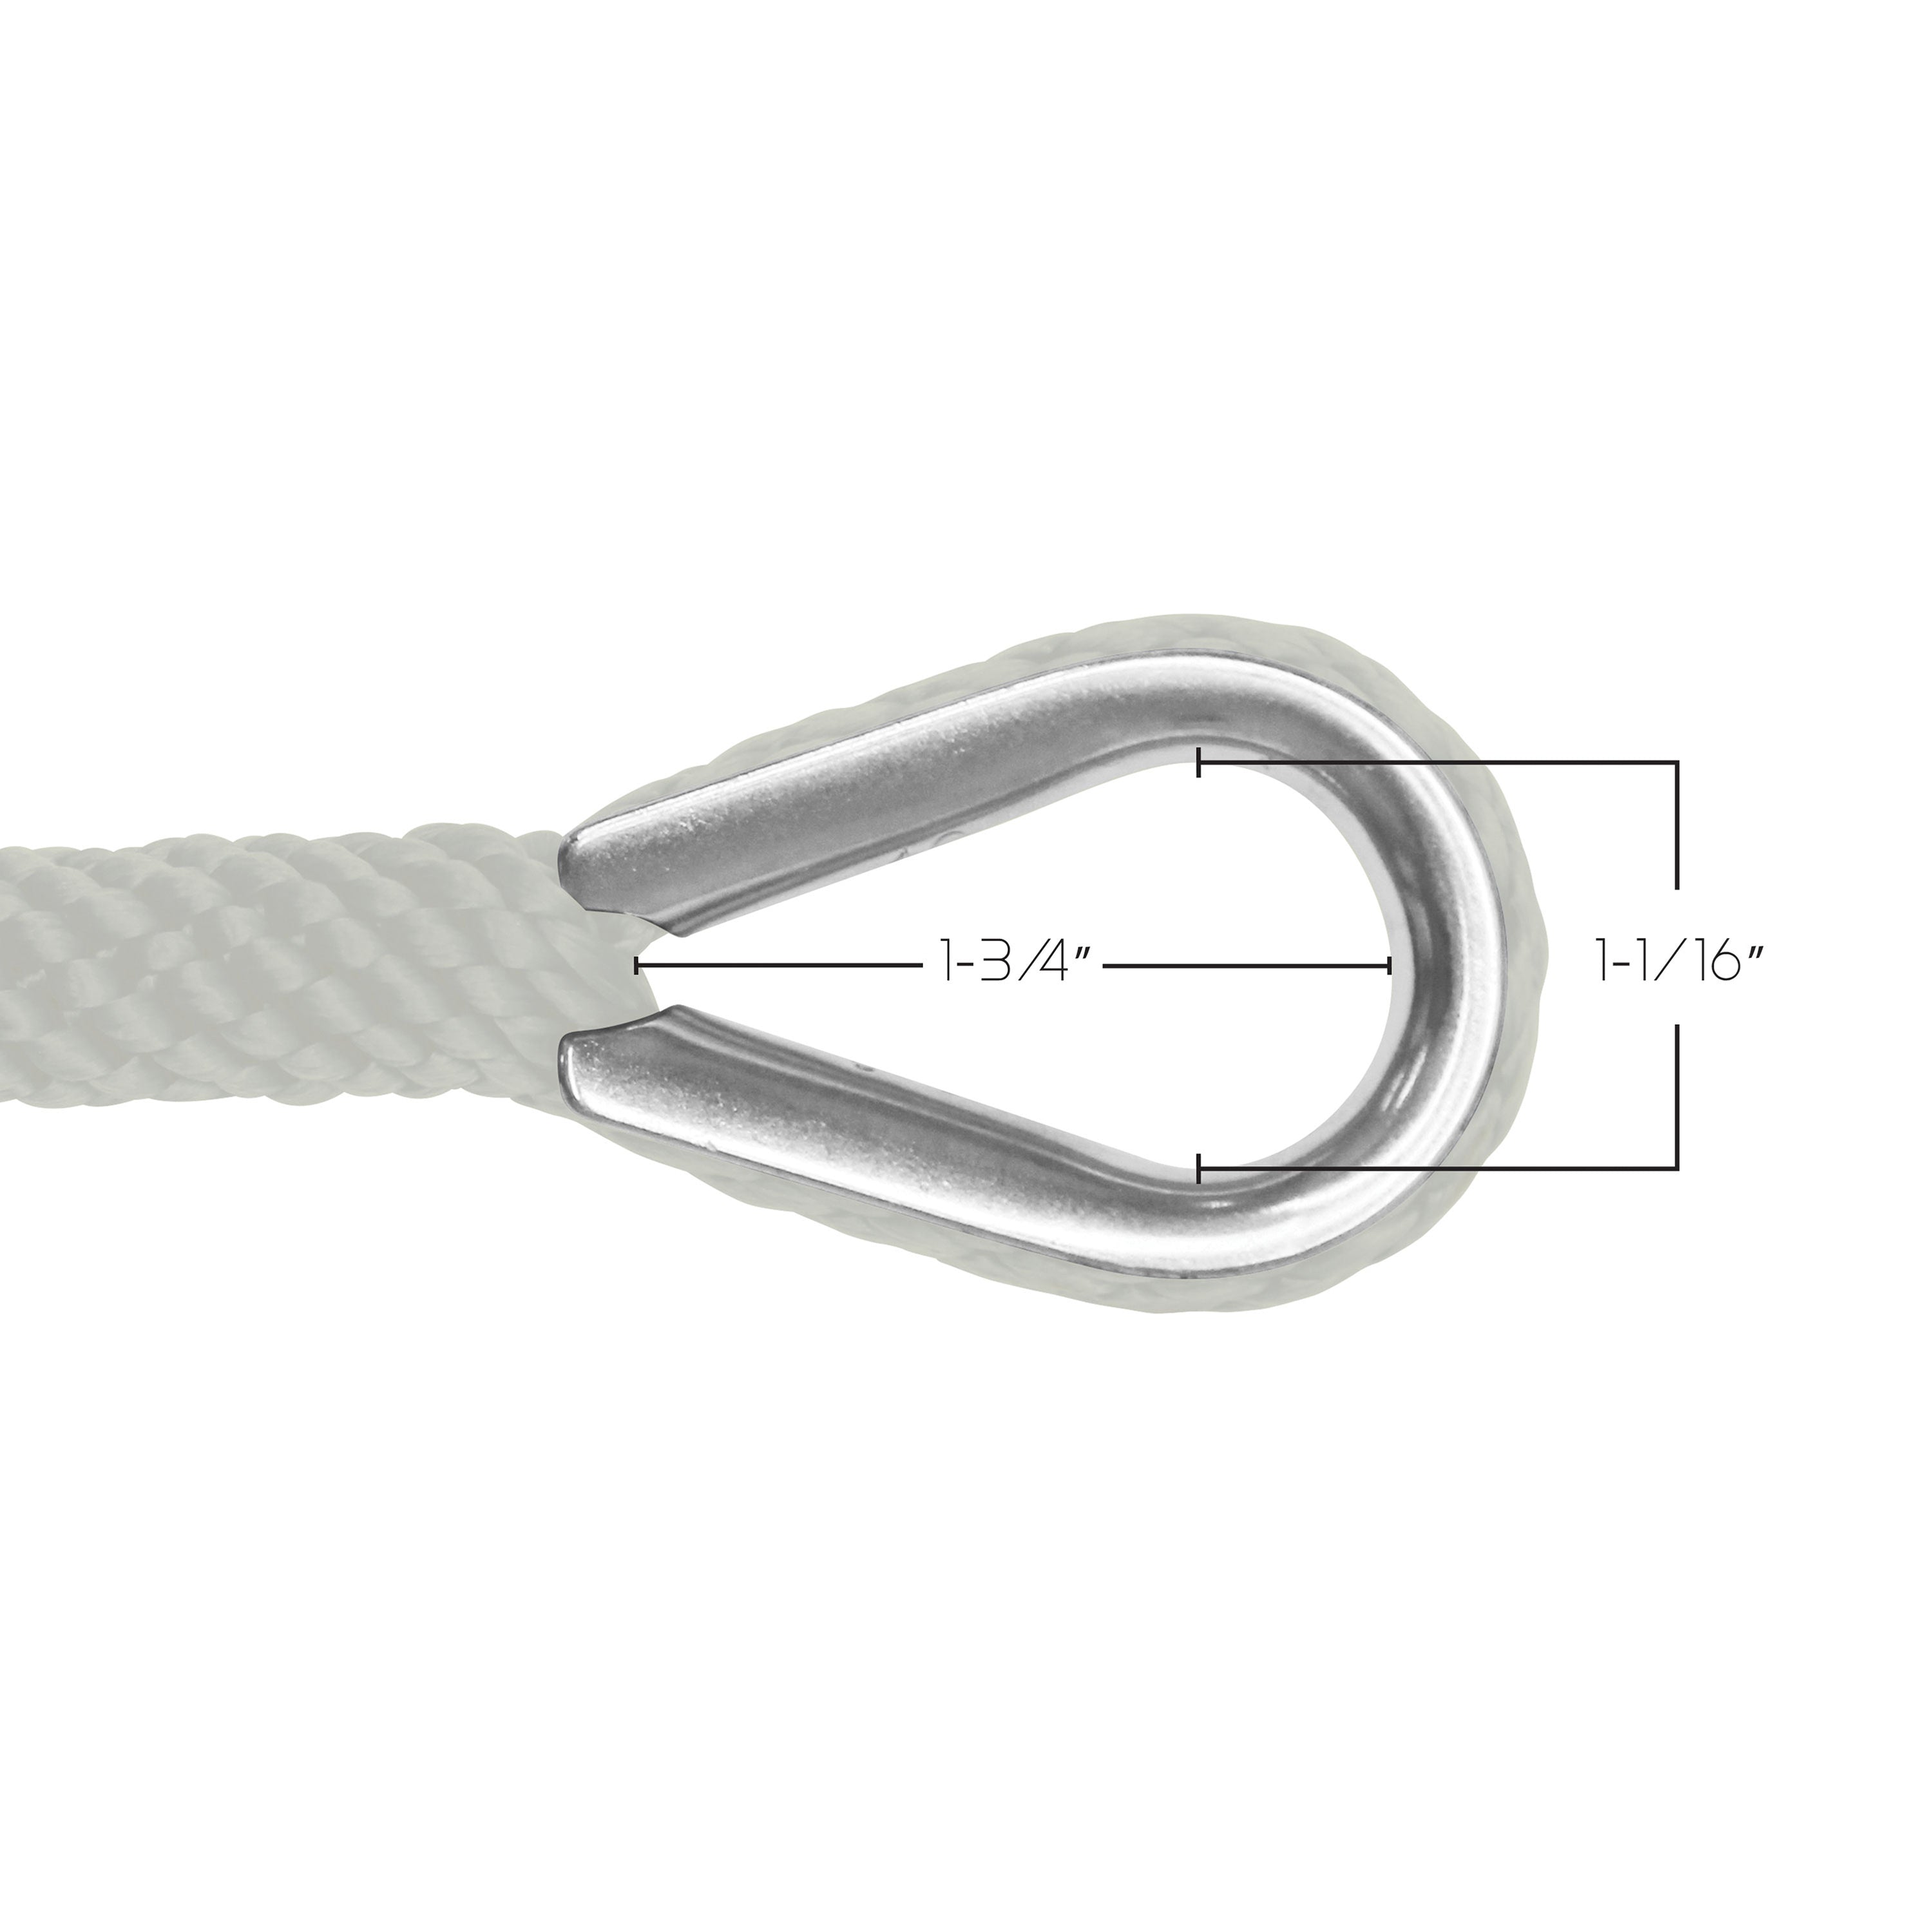 Extreme Max 3006.3458 BoatTector Solid Braid MFP Anchor Line with Thimble - 1/2" x 100', White